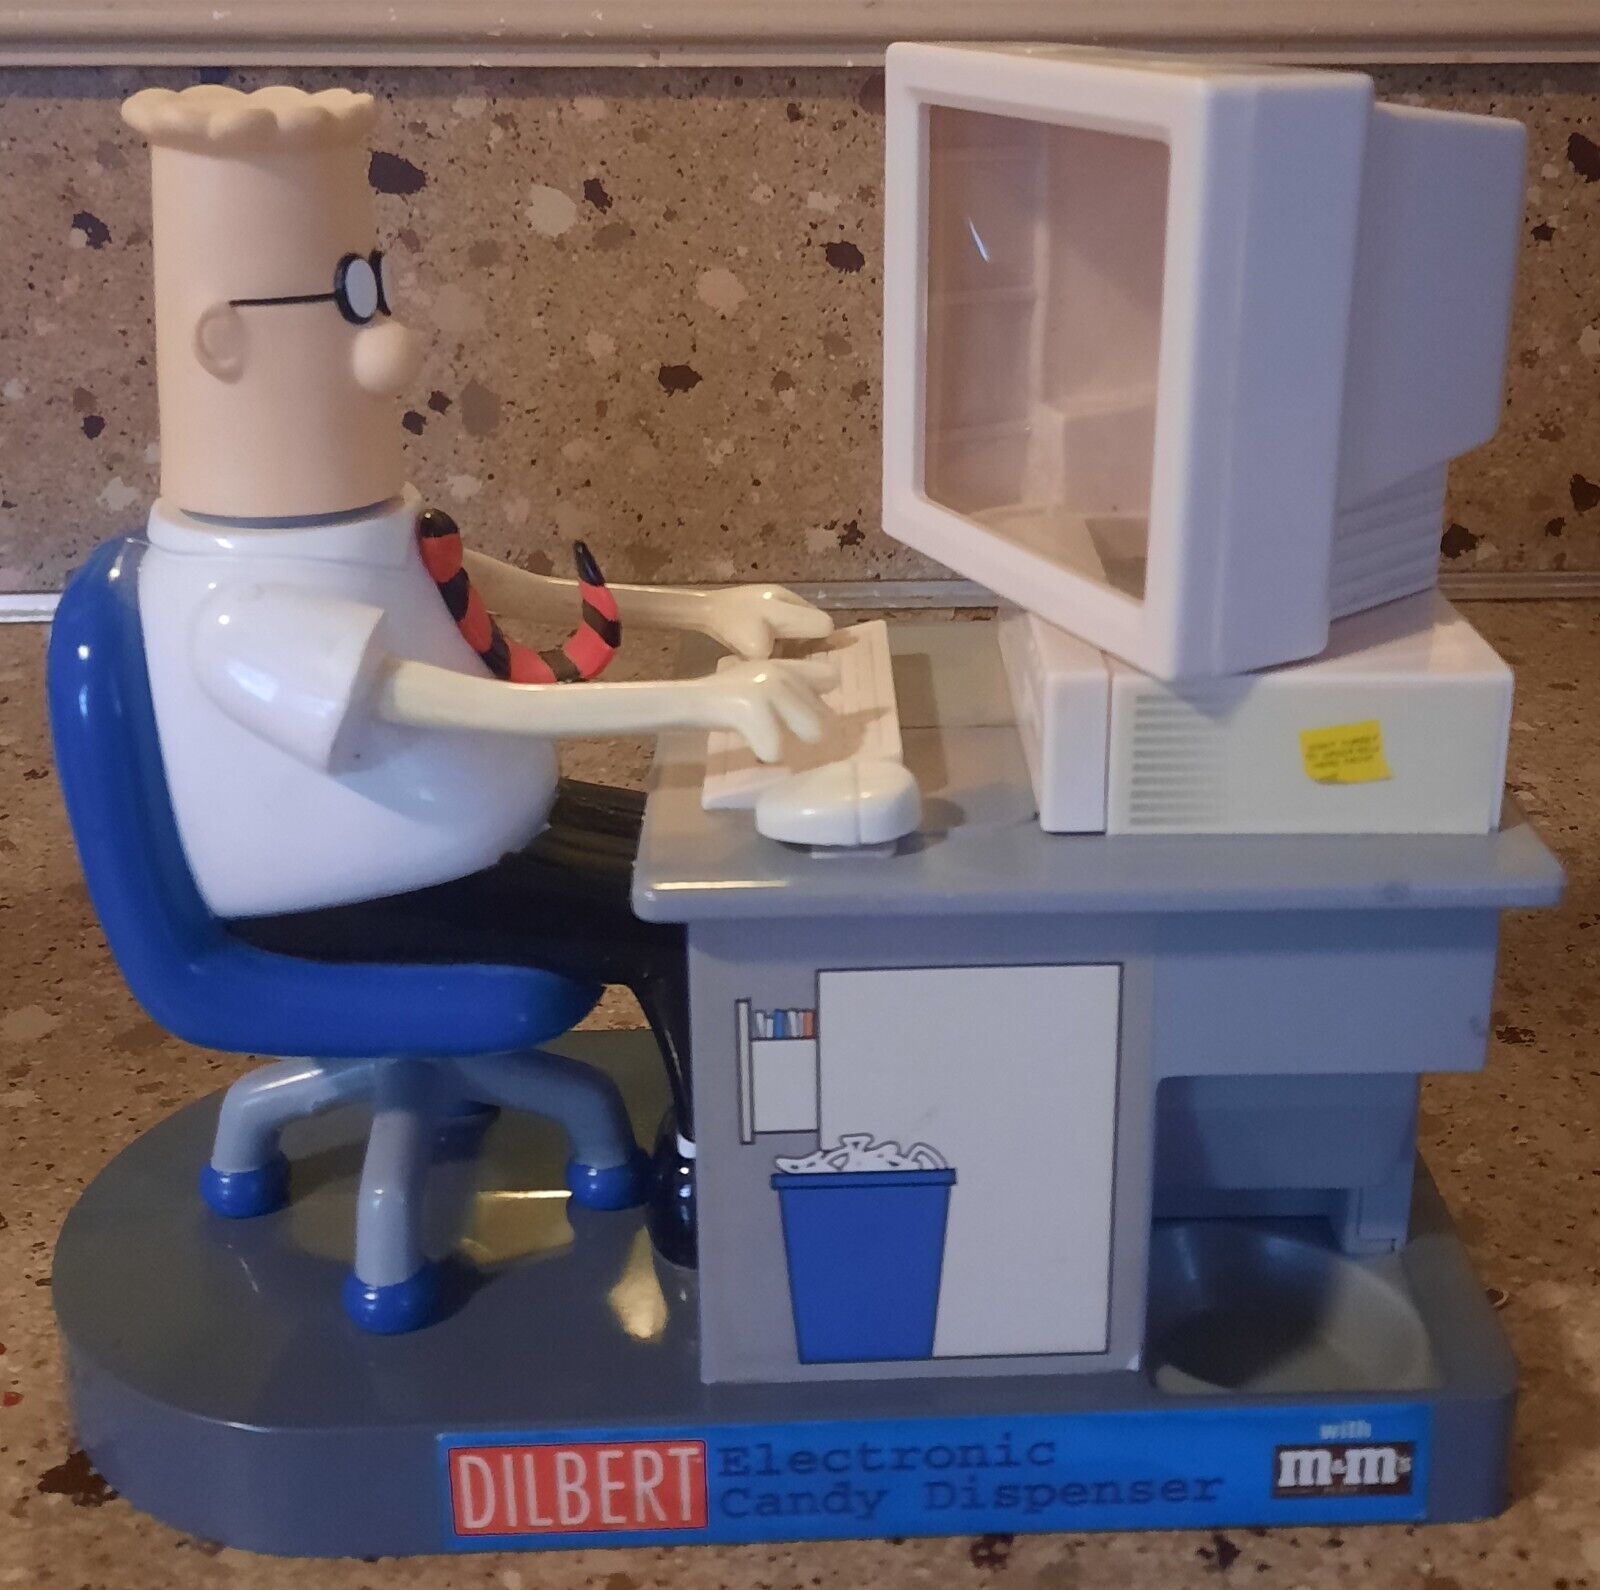 1998 Dilbert Electronic Candy M &M Dispenser Tested Desk Top - $39.59